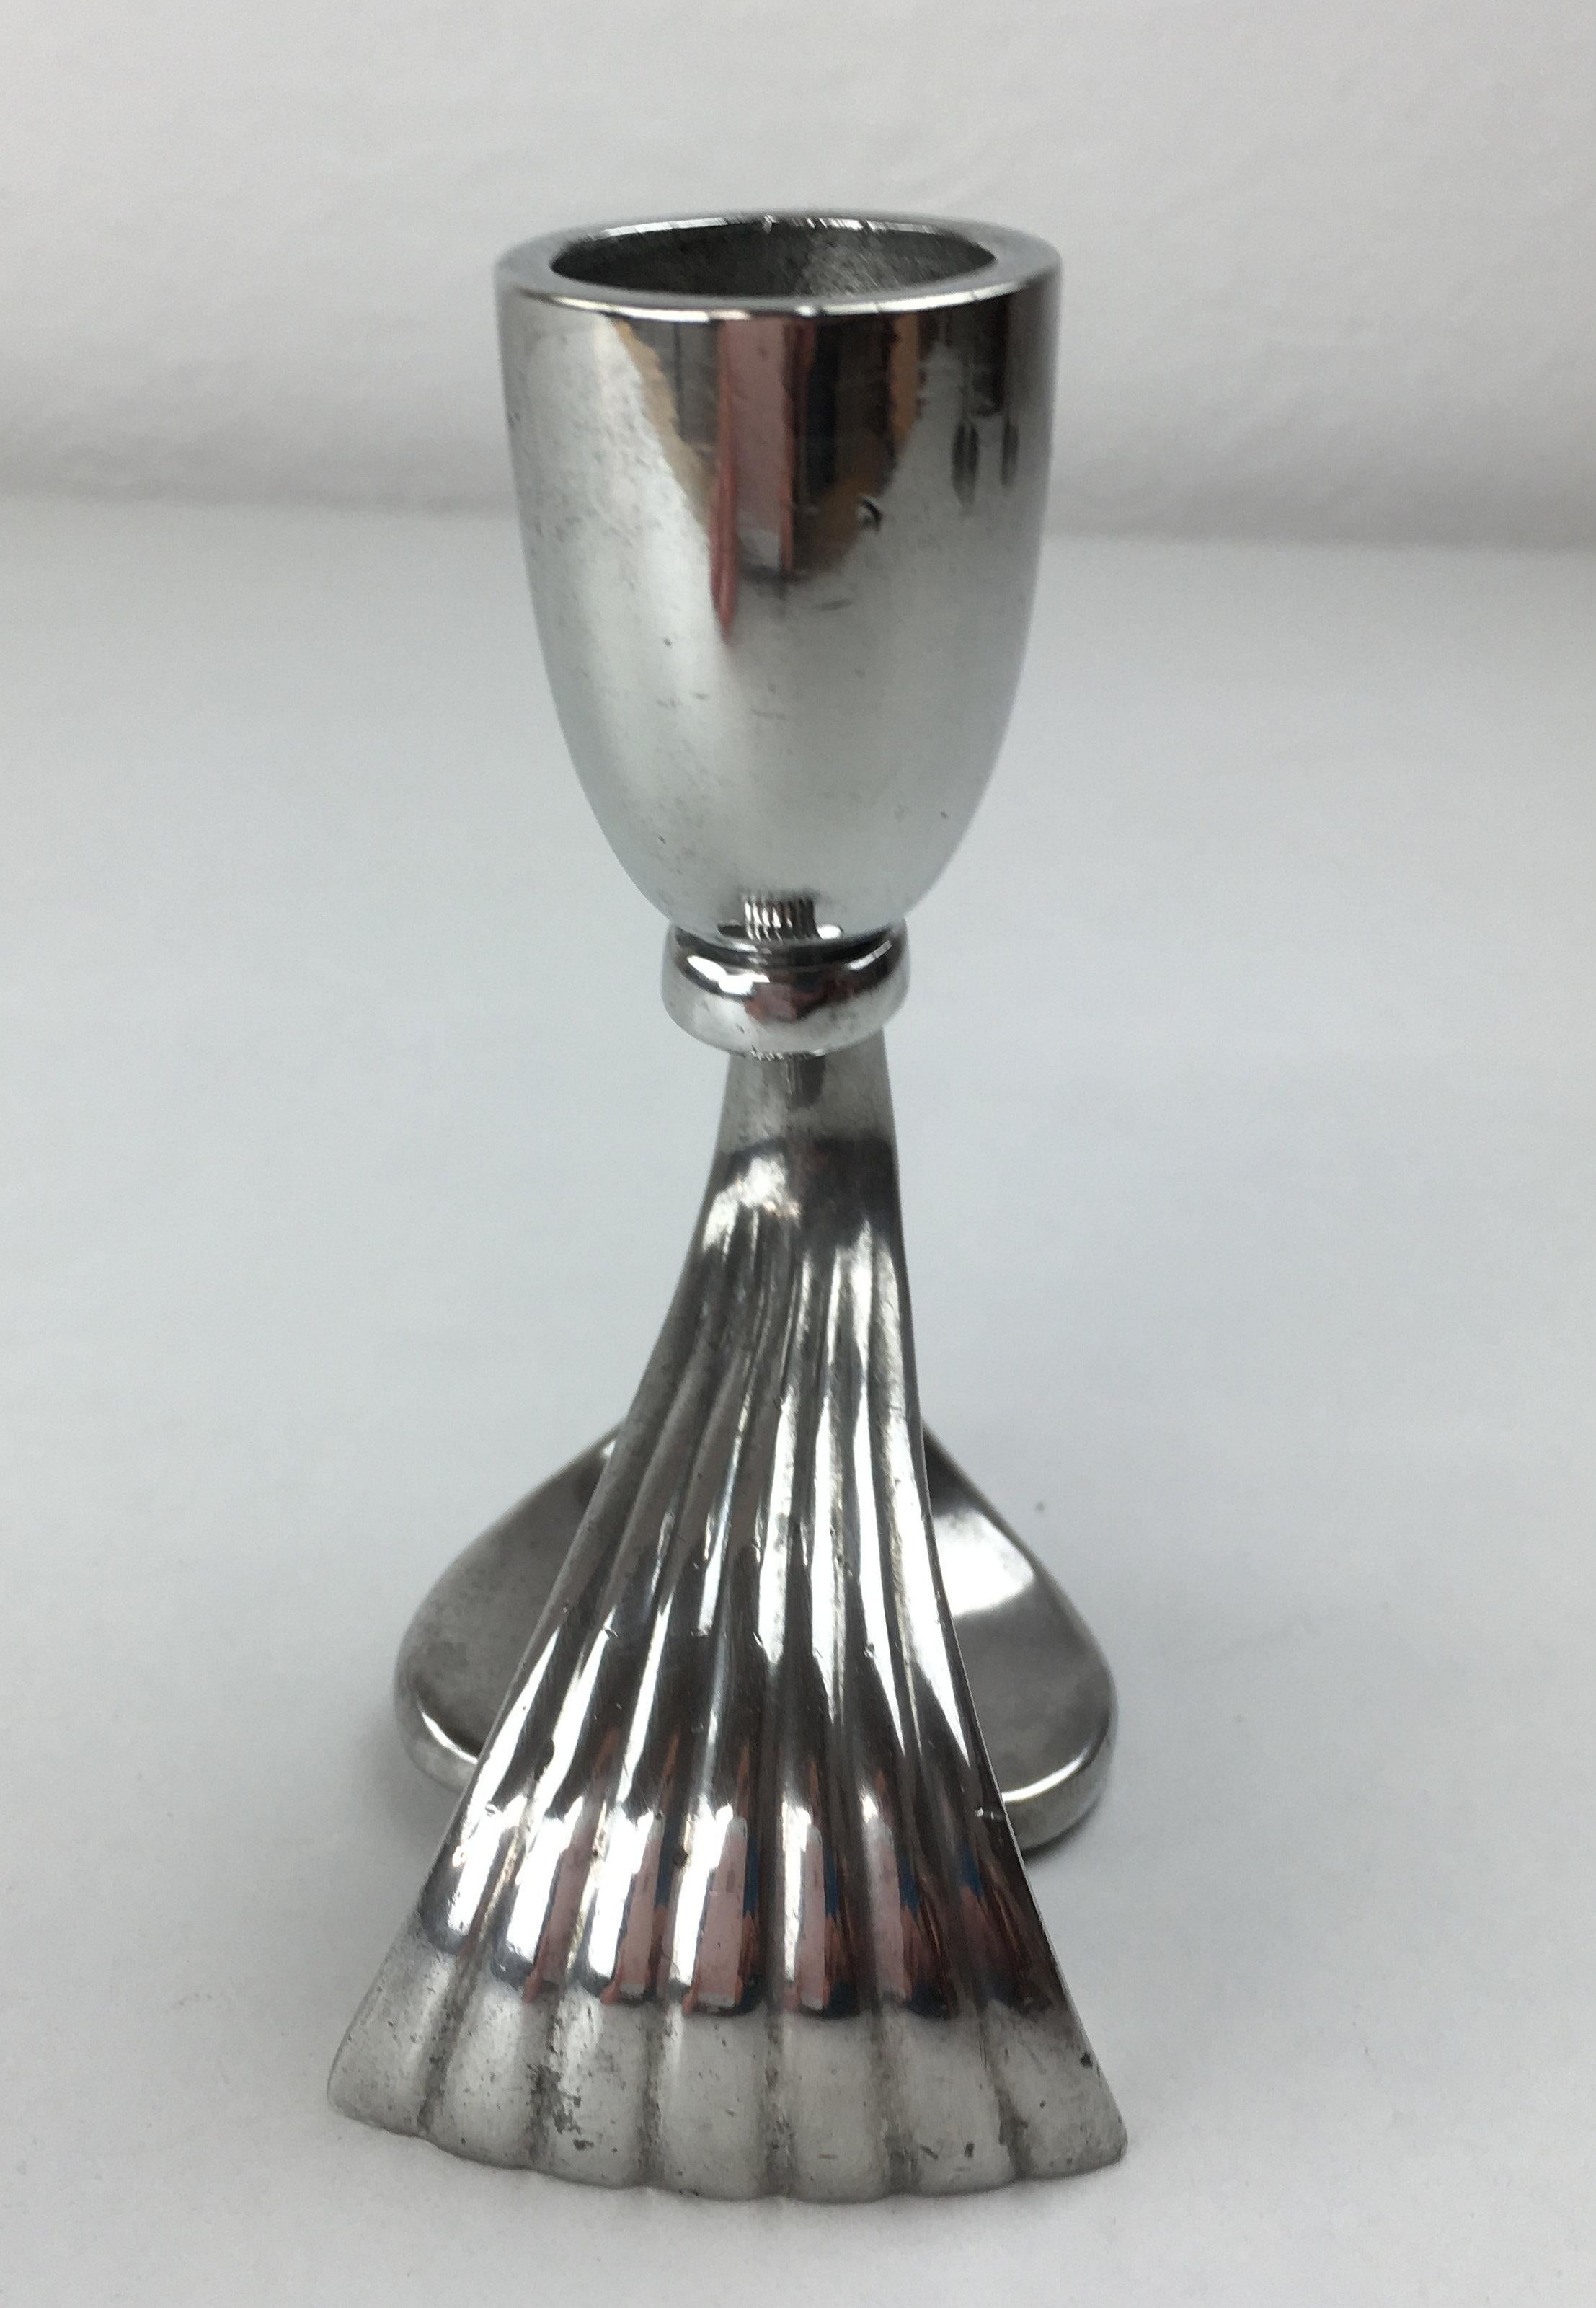 Danish Just Andersen Art Deco pewter candle holder produced by Just Andersen A/S in the 1930's.

The candle holder is in good vintage condition and marked with Just. Andersens triangle mark. 

Just Andersen 1884-1943 was born in Godhavn on the